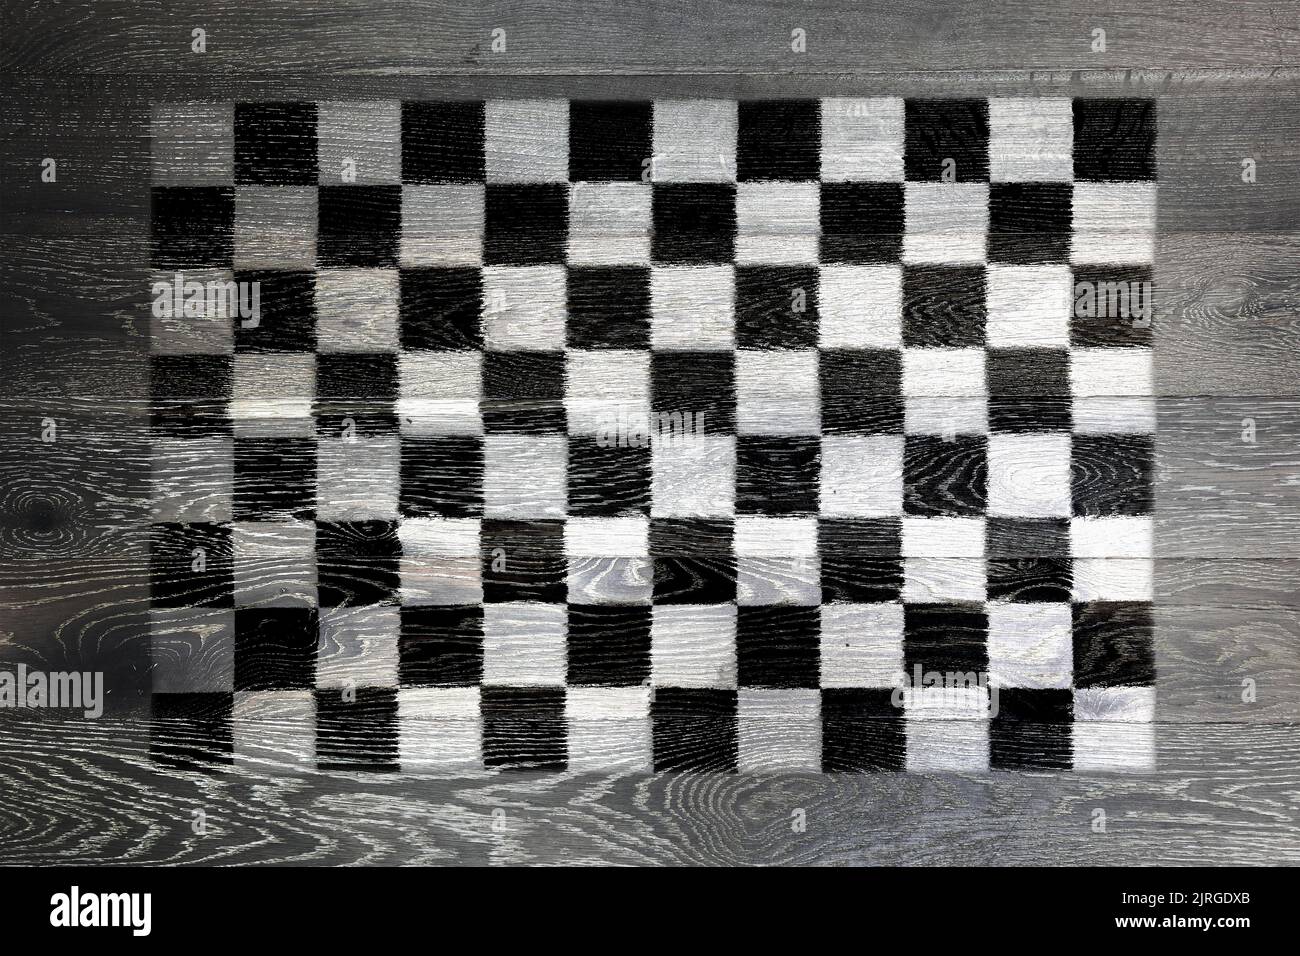 Chequered flag on rustic old wood surface background Stock Photo